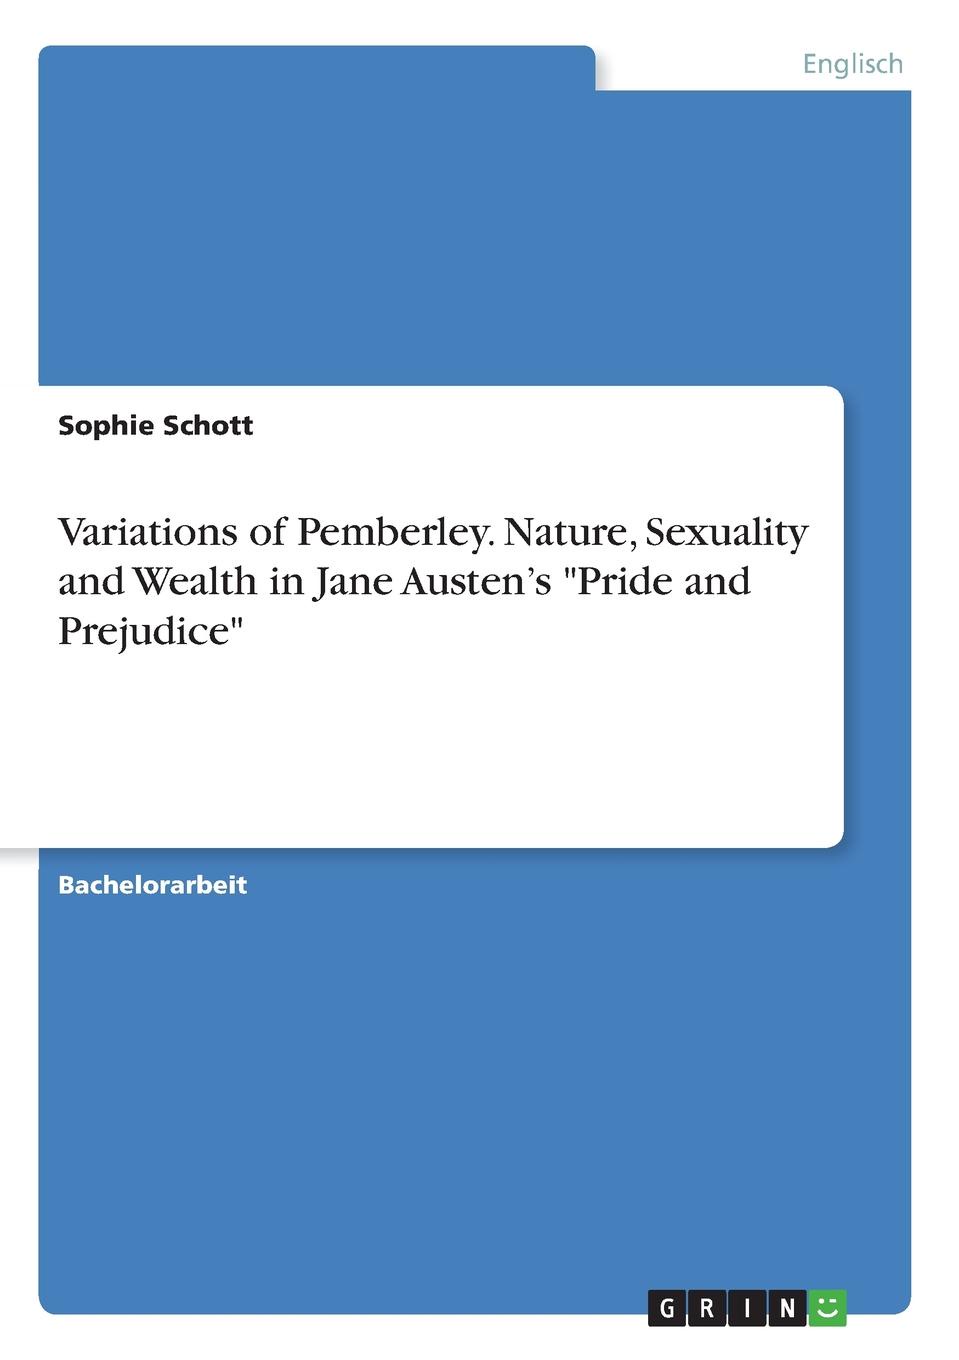 Variations of Pemberley. Nature, Sexuality and Wealth in Jane Austen.s \